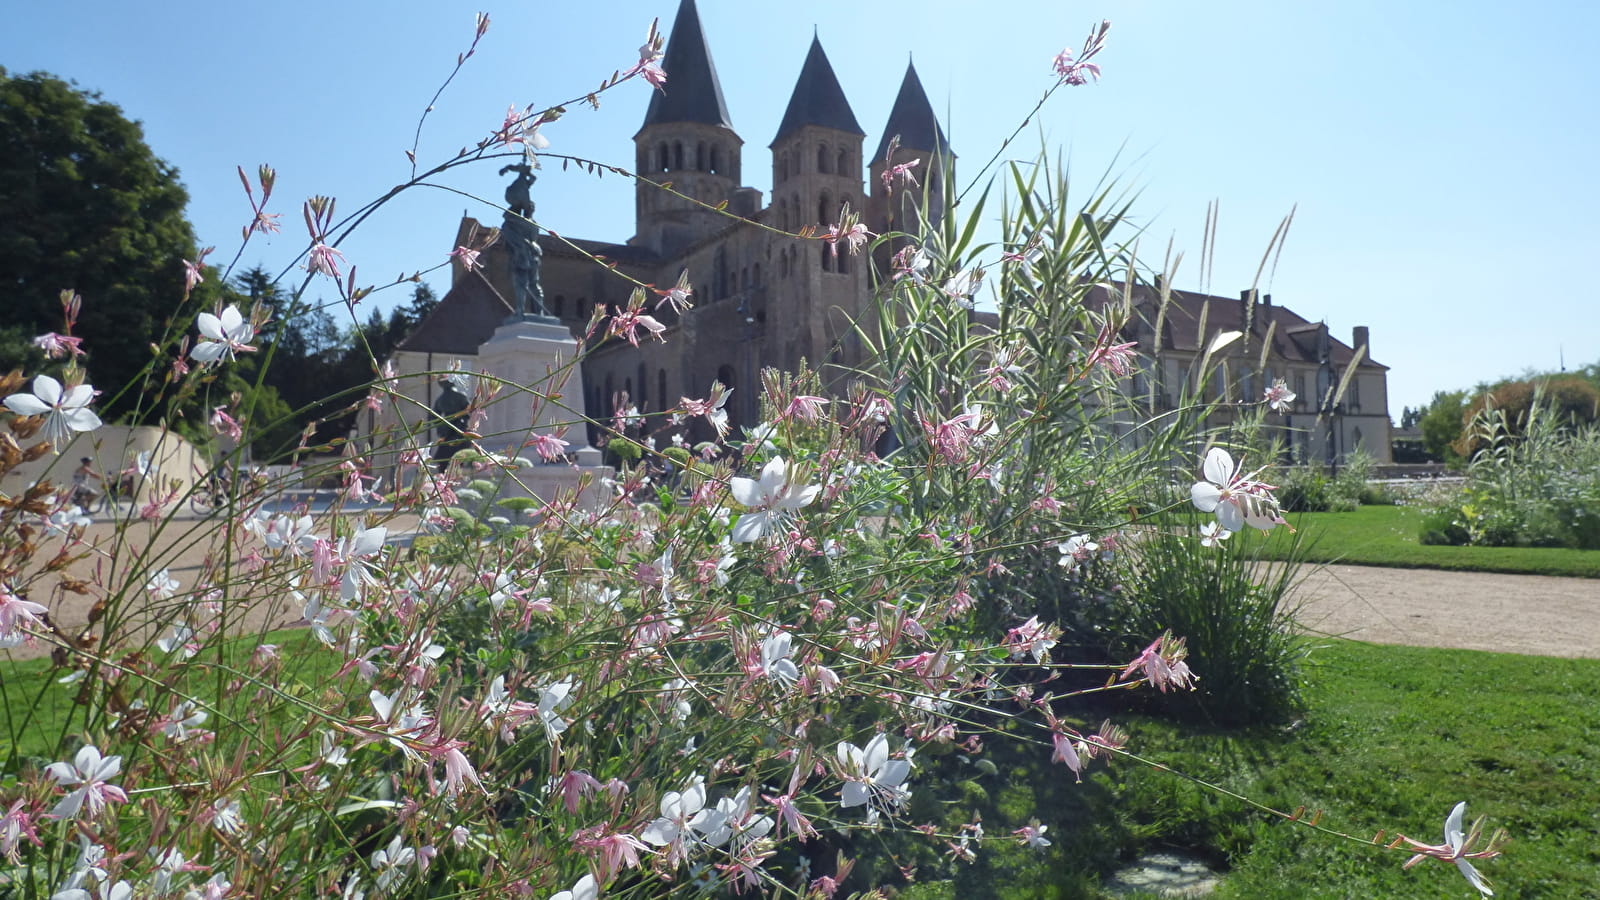 Guided tour: Flowering the town